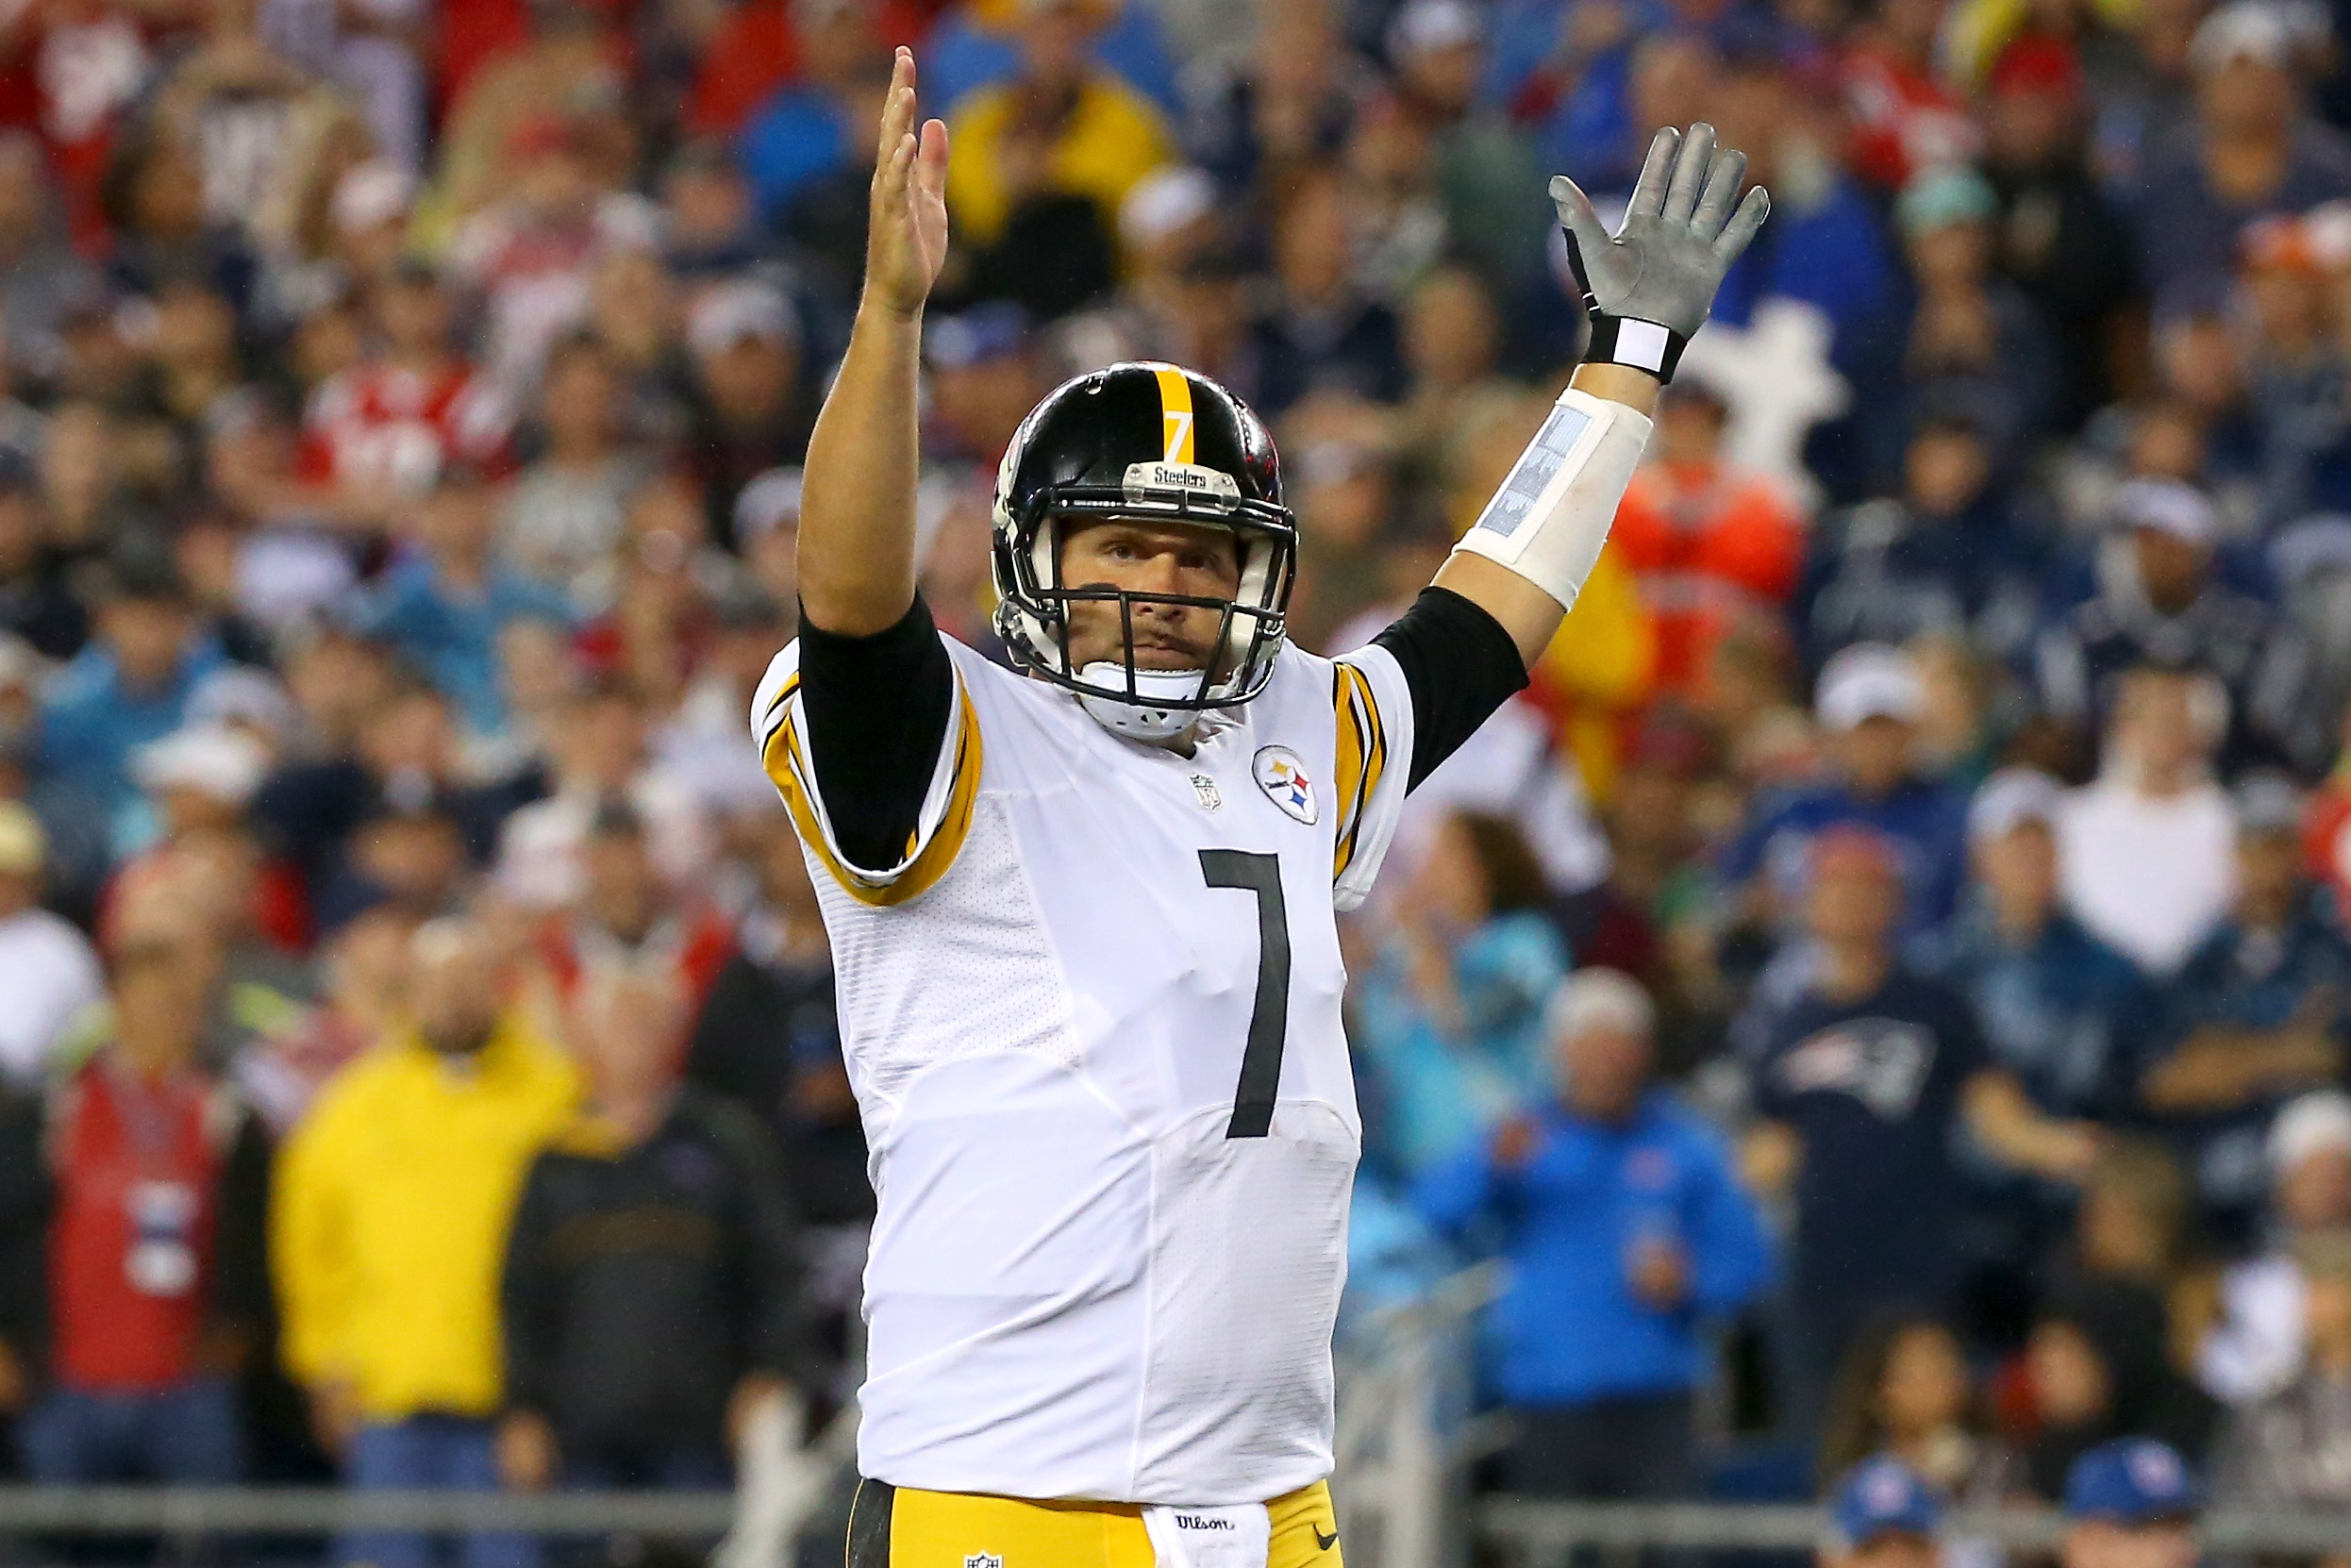 Big Ben hopes to rebound from the opening night loss in Foxboro (Getty).